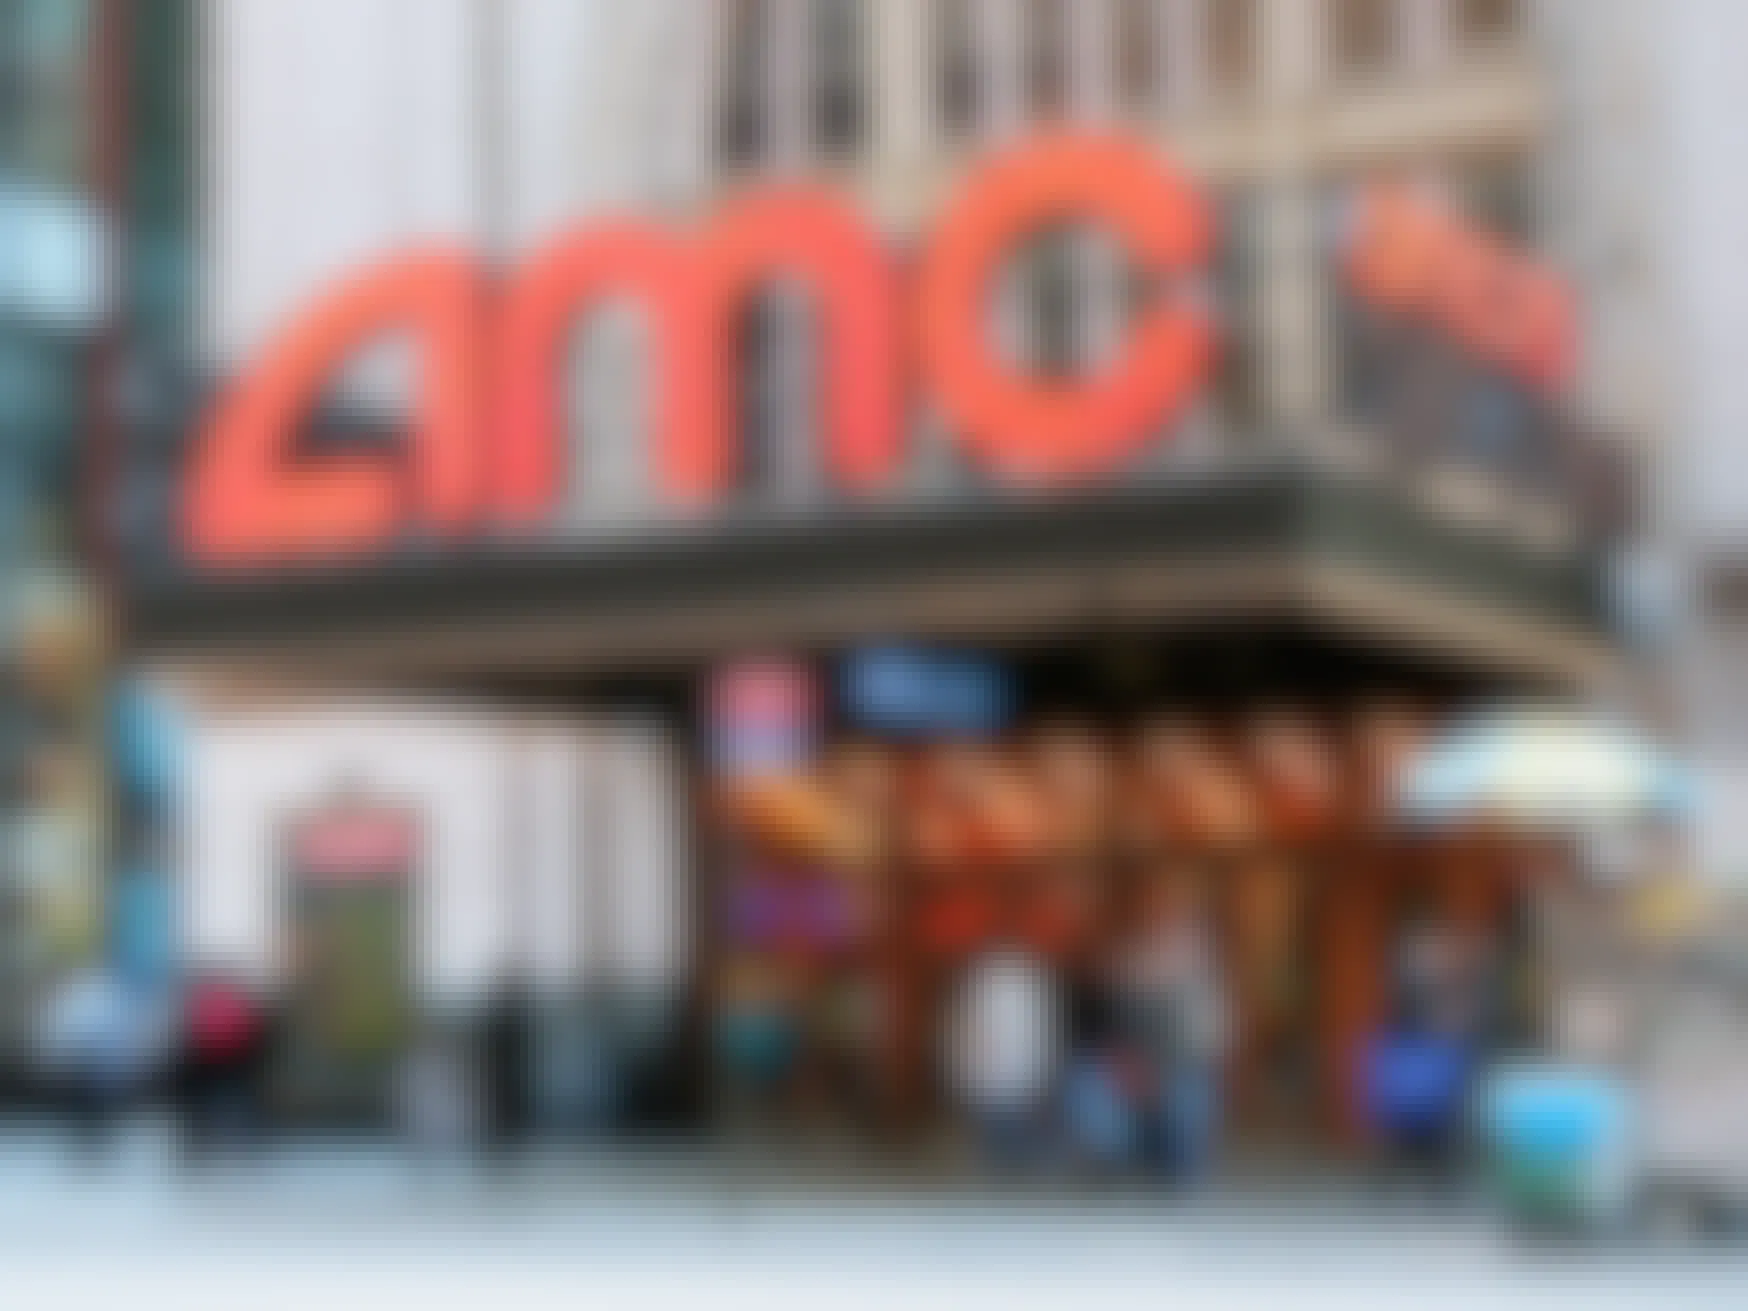 An AMC movie theater entrance with people walking by on the sidewalk.